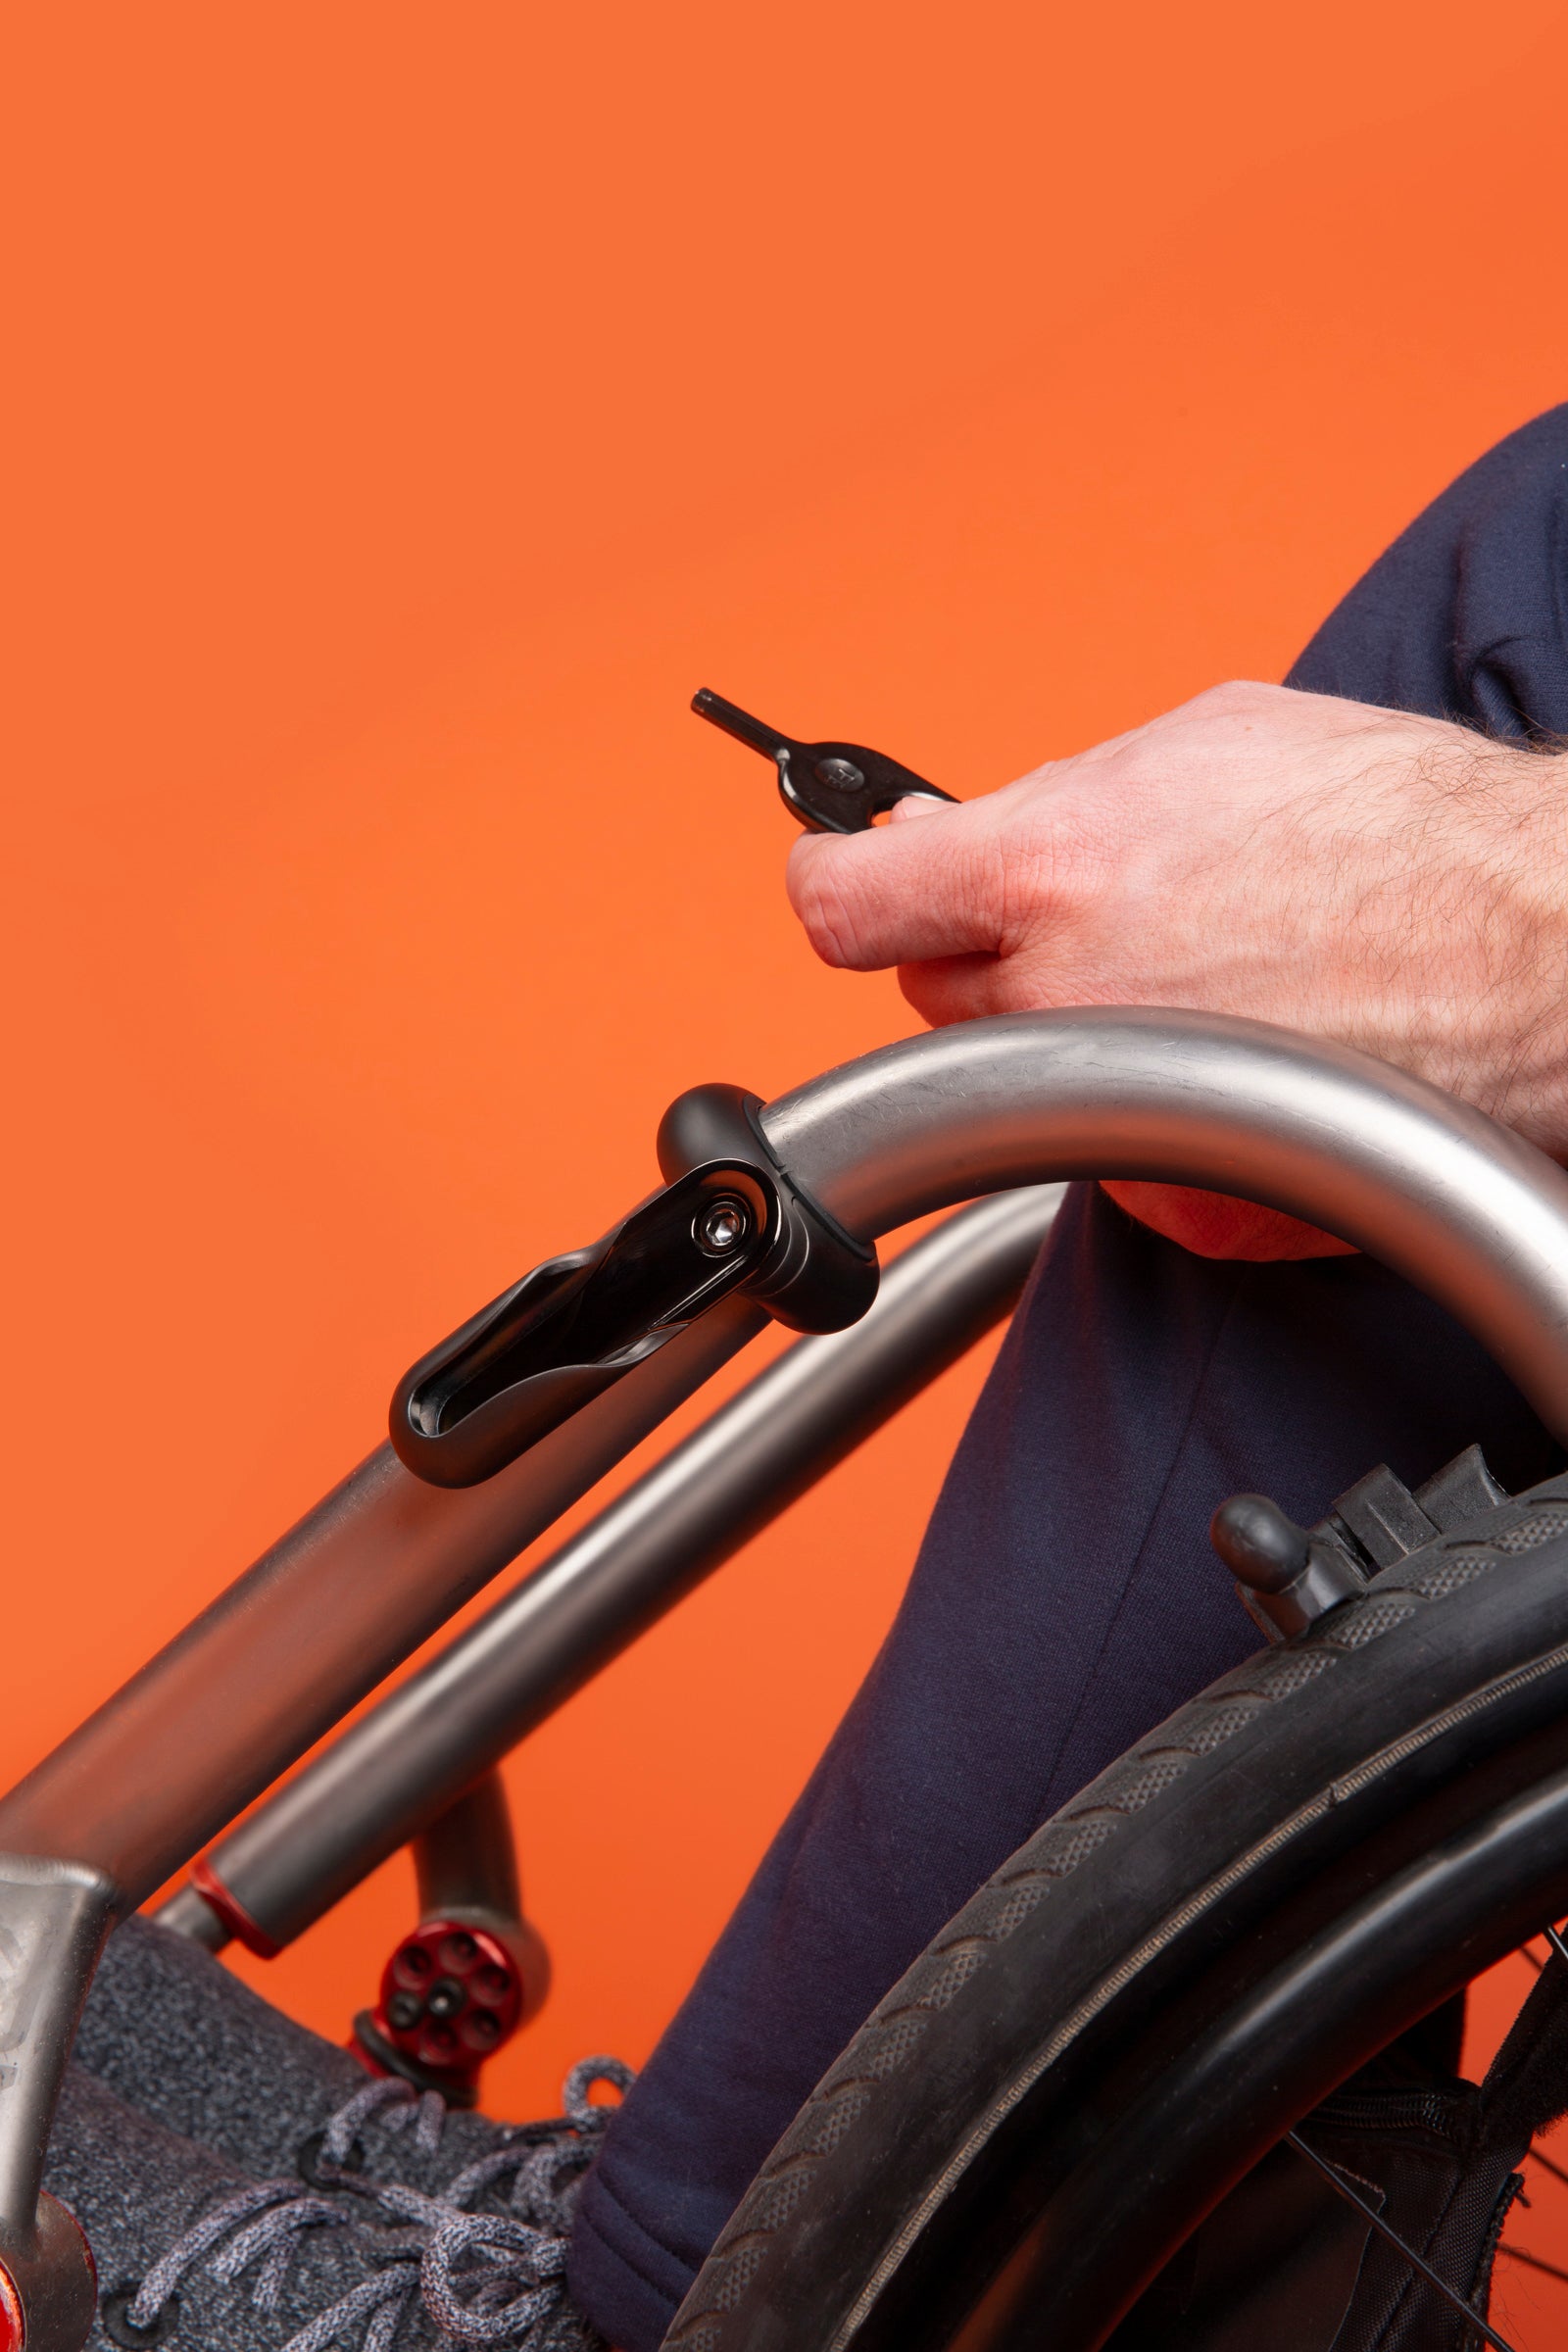 Wheelchairs Attachment system